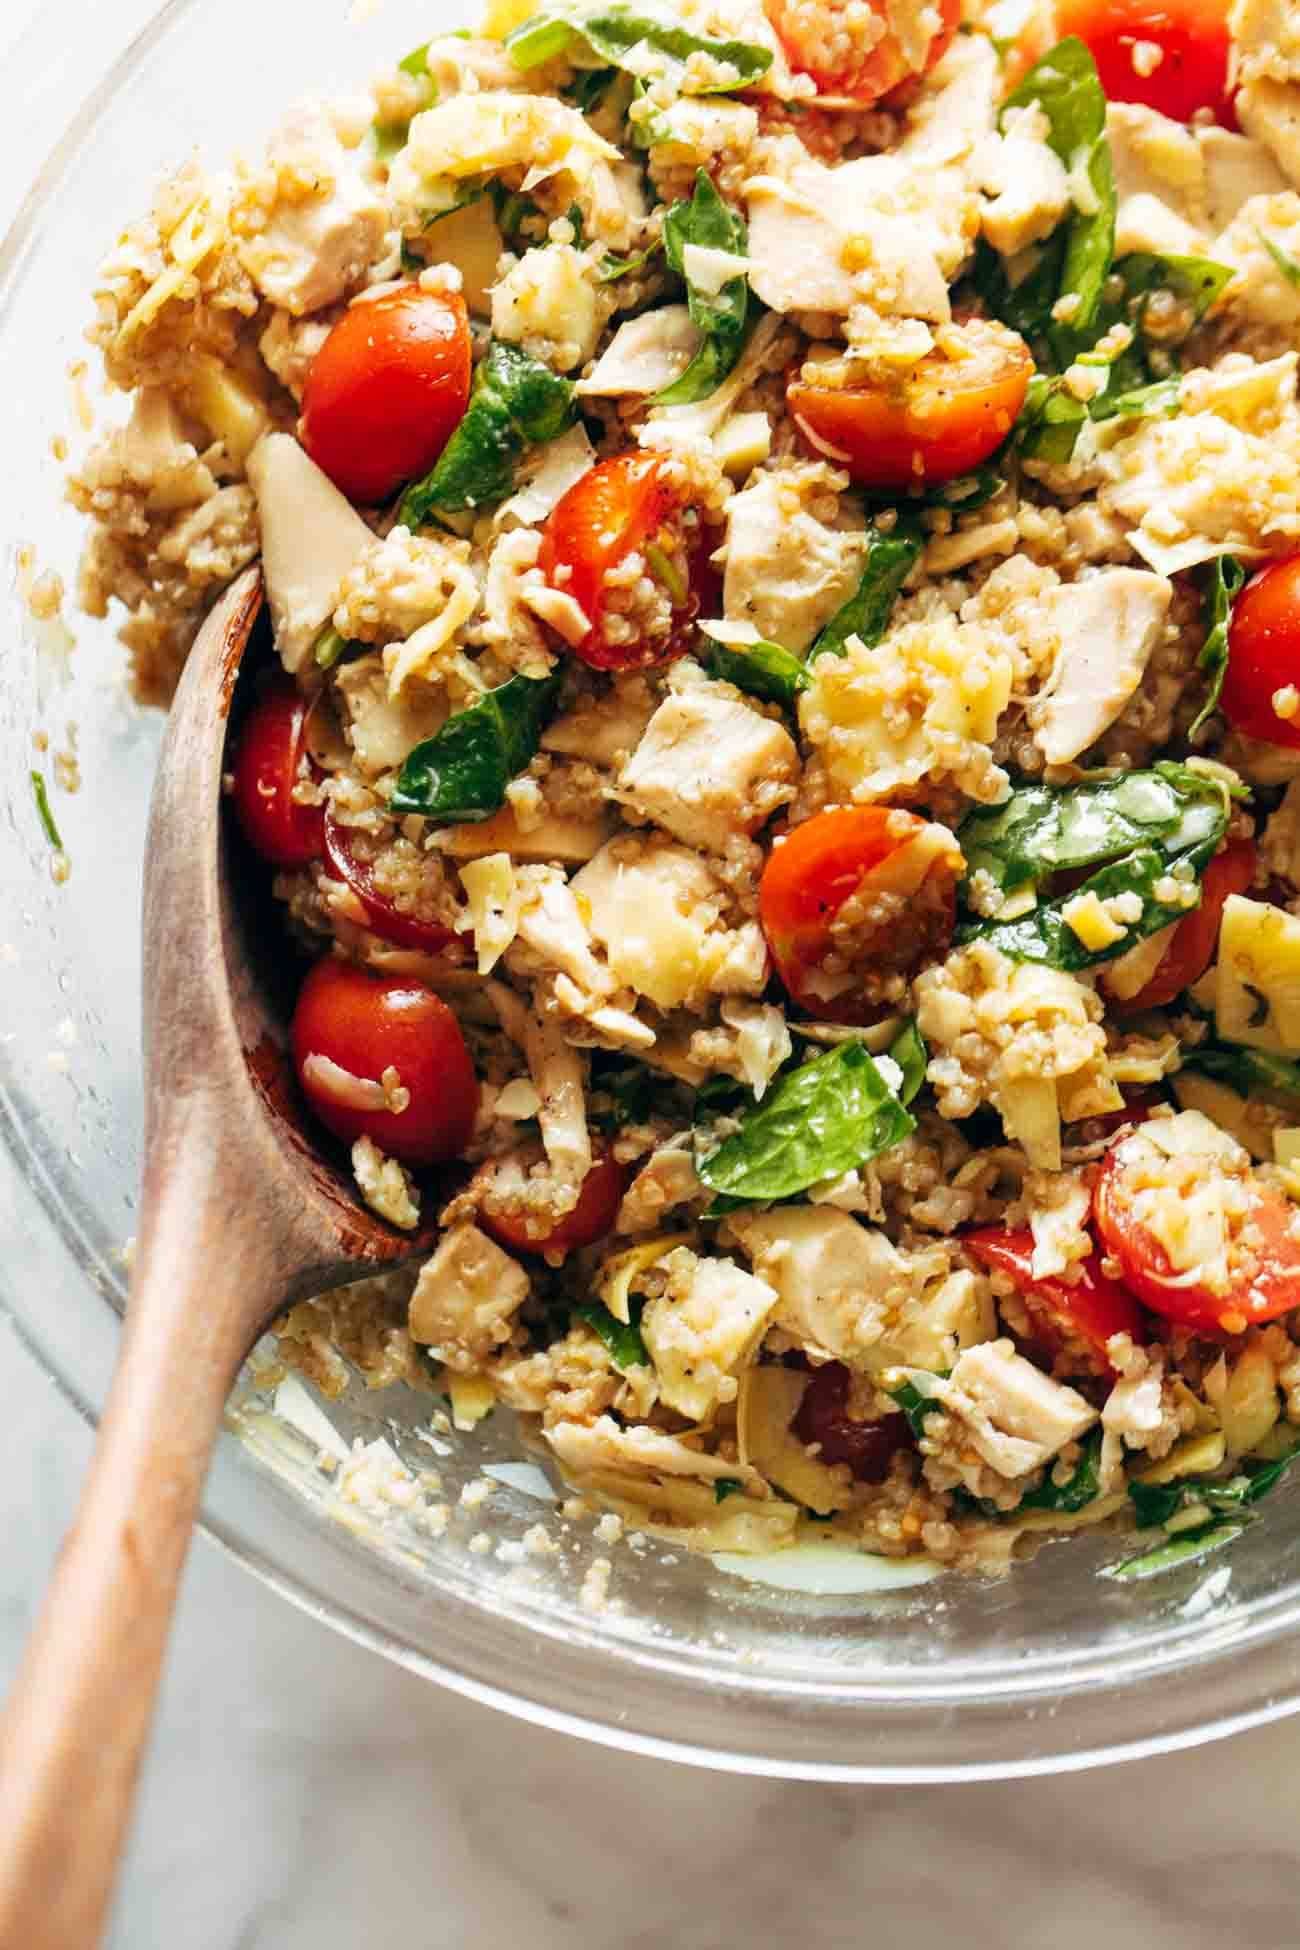 Chicken quinoa salad in a bowl with a wooden spoon